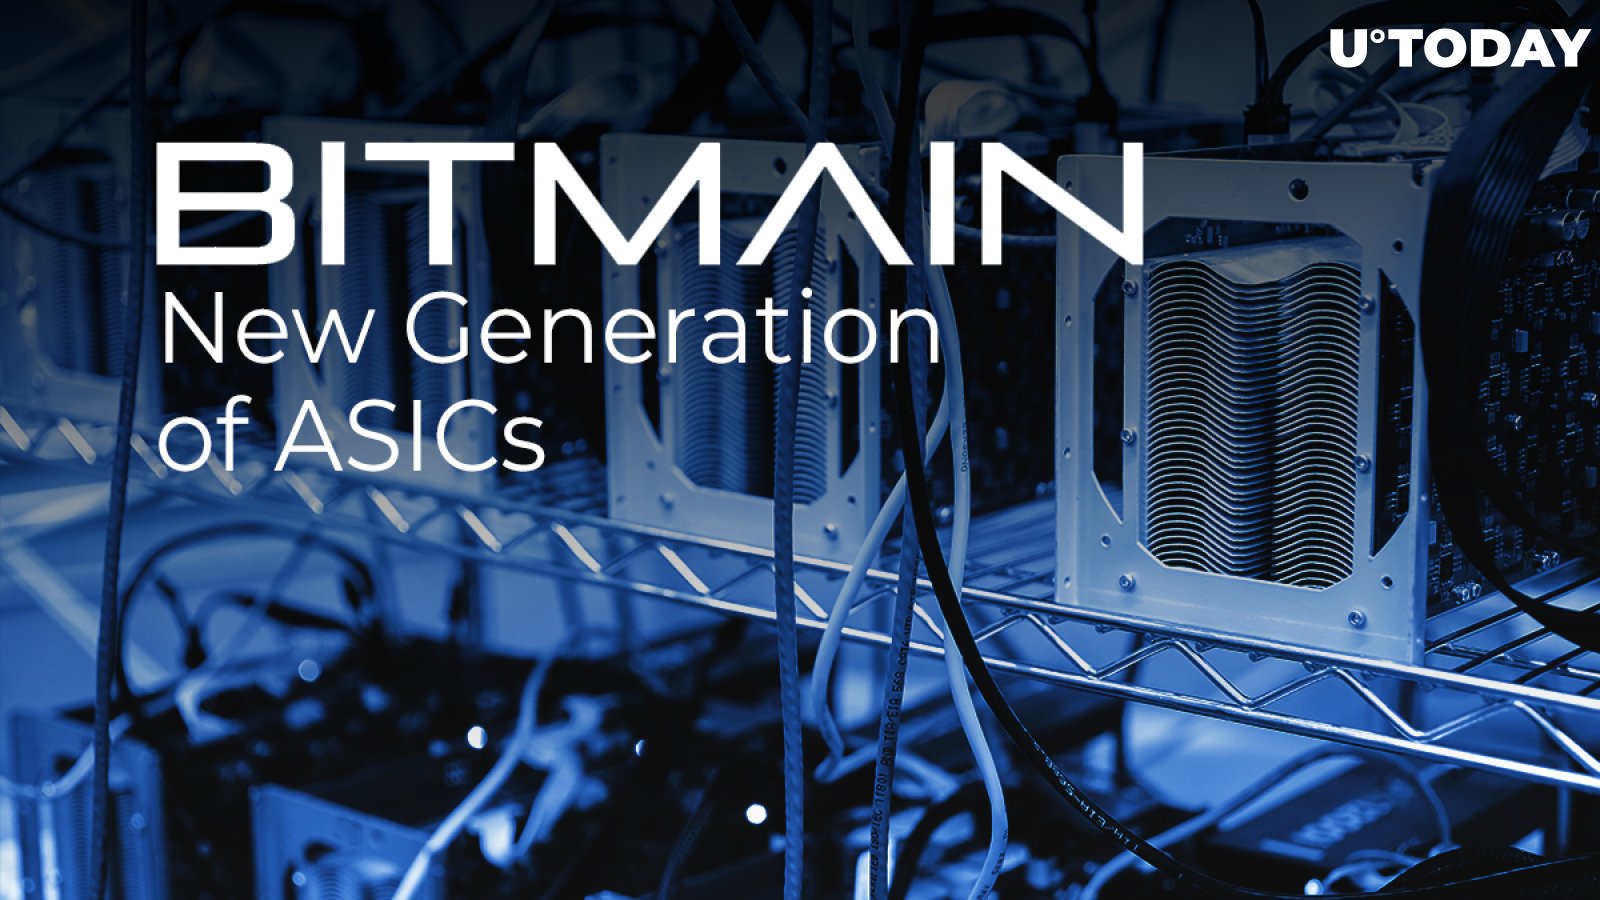 Bitmain Teases New Generation of ASICs, Antminer S19, Ten Weeks Before Bitcoin (BTC) Halving